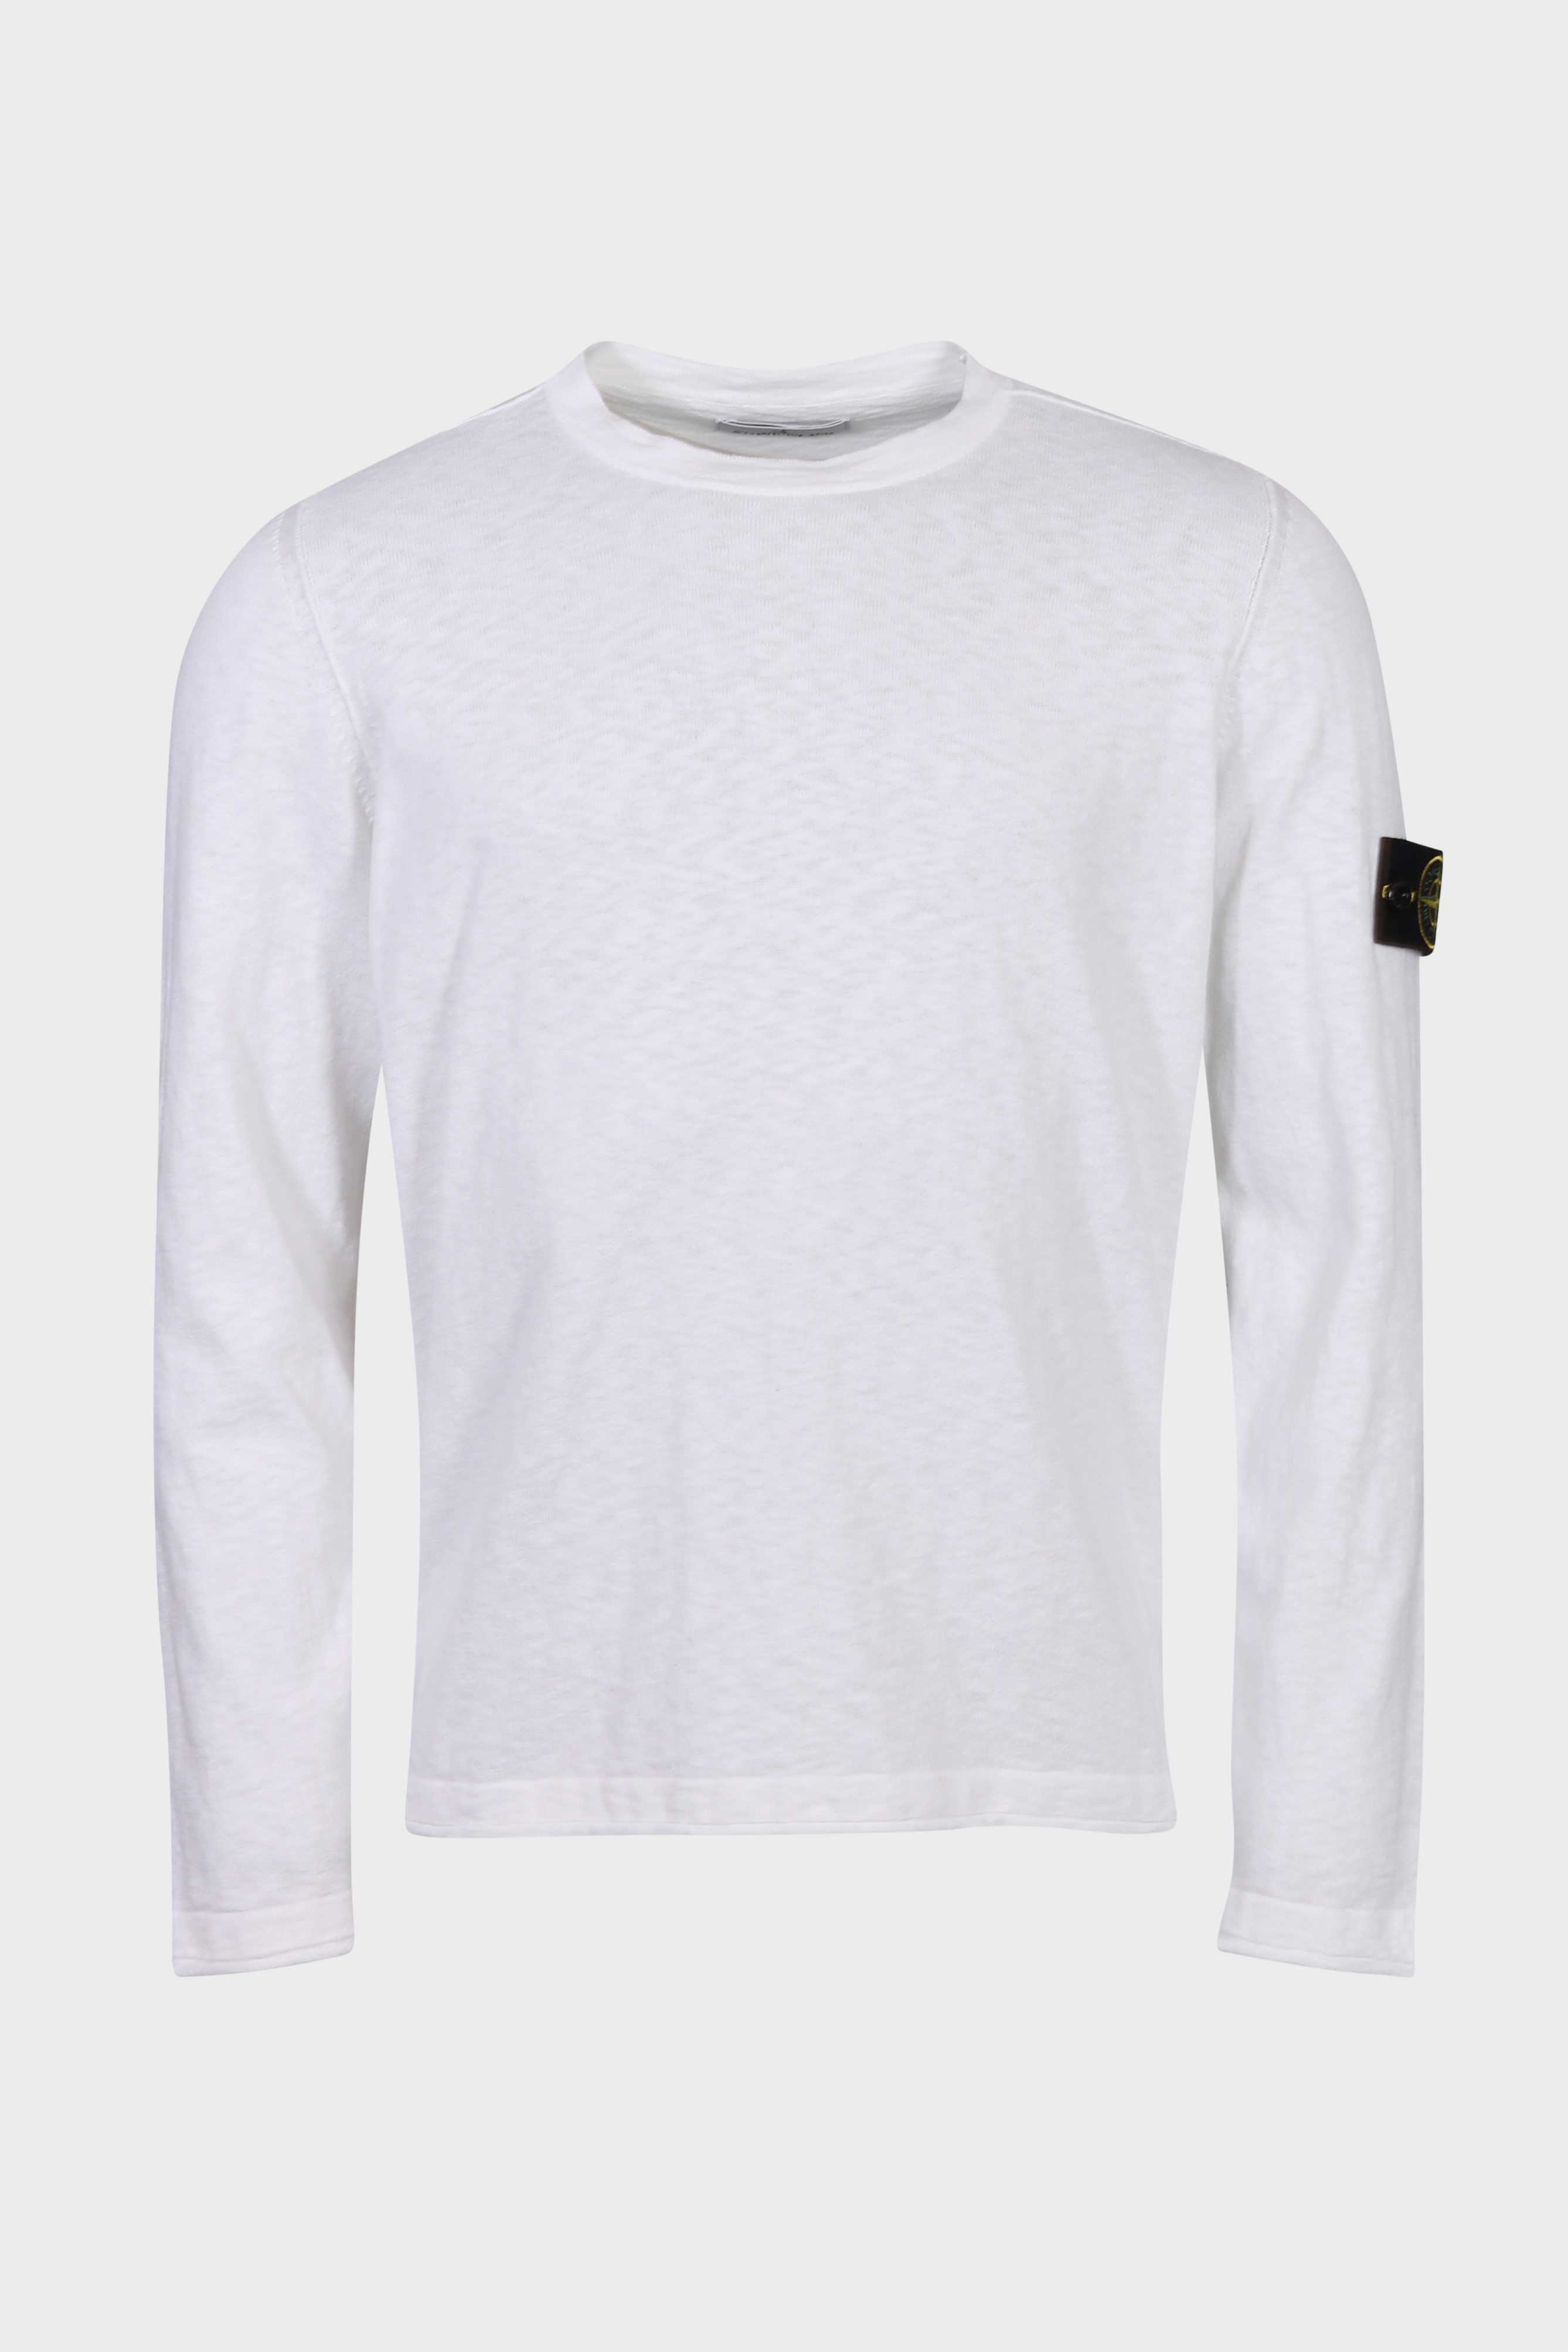 STONE ISLAND Summer Knit Pullover in White